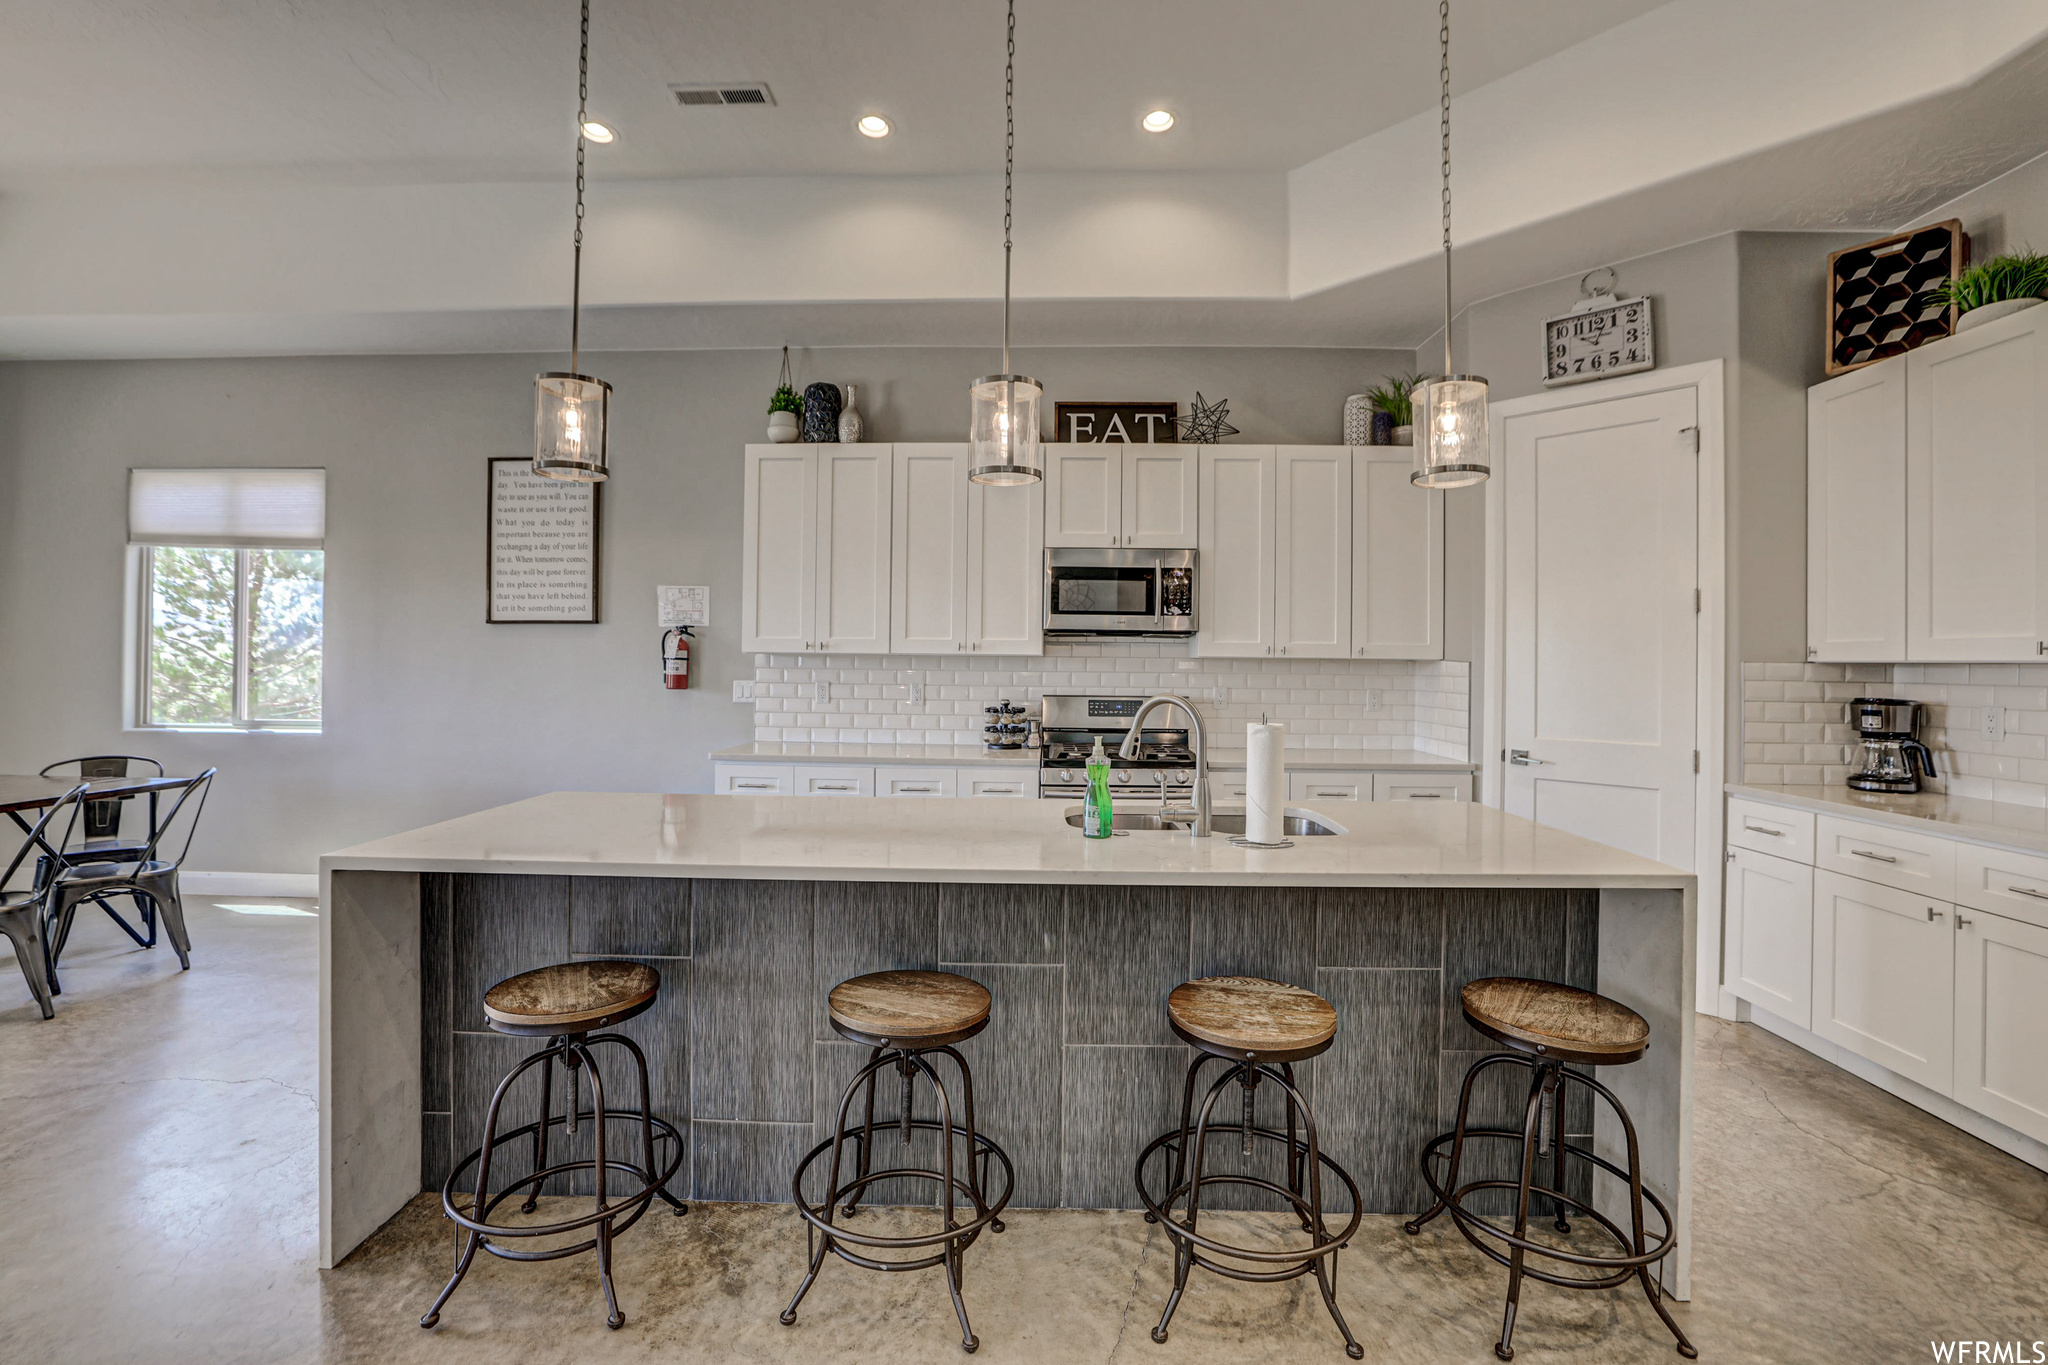 Kitchen featuring natural light, a center island, a kitchen breakfast bar, stainless steel microwave, range oven, light countertops, light tile floors, pendant lighting, and white cabinets